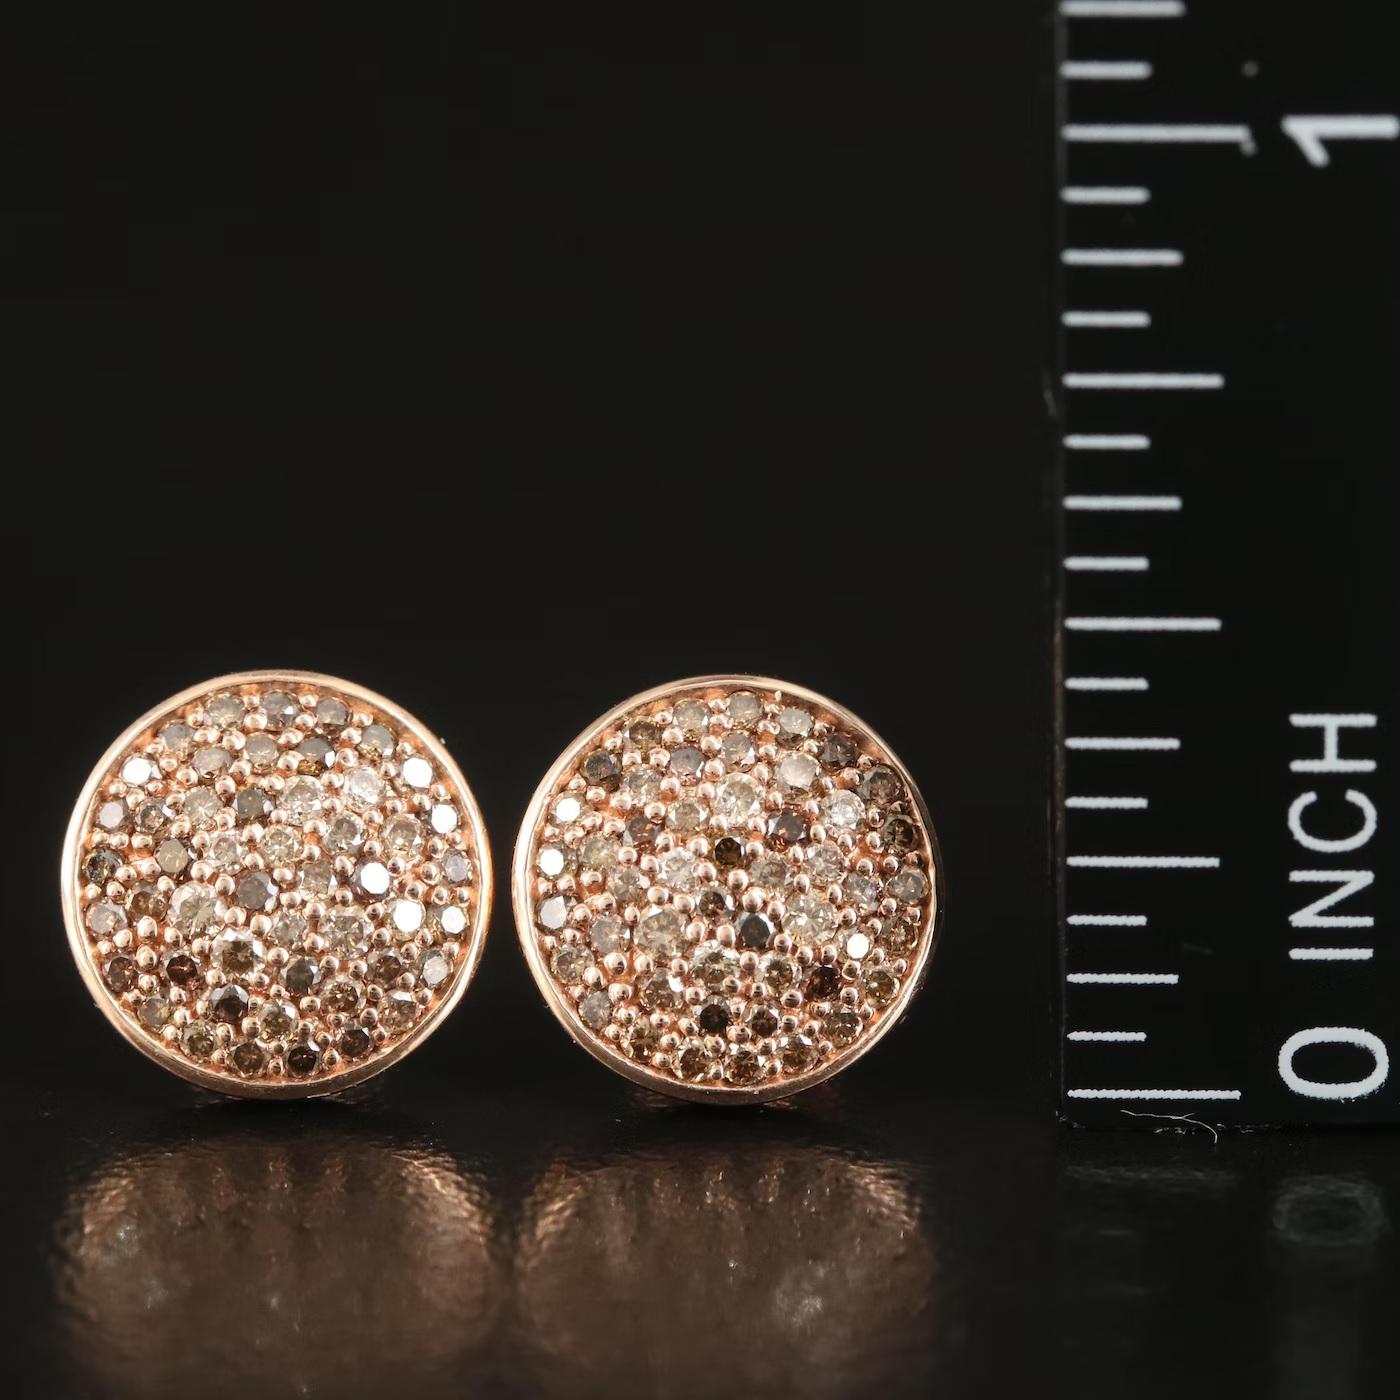 Effy designer Earrings, stamped EFFY

NEW with Tags, tag price $3950

0.75 CWT Diamond, SI-VS Clarity / Espresso multicolor, high quality

14K Rose gold, stamped 14K

0.5 Inch in Diameter

Comes with gift box